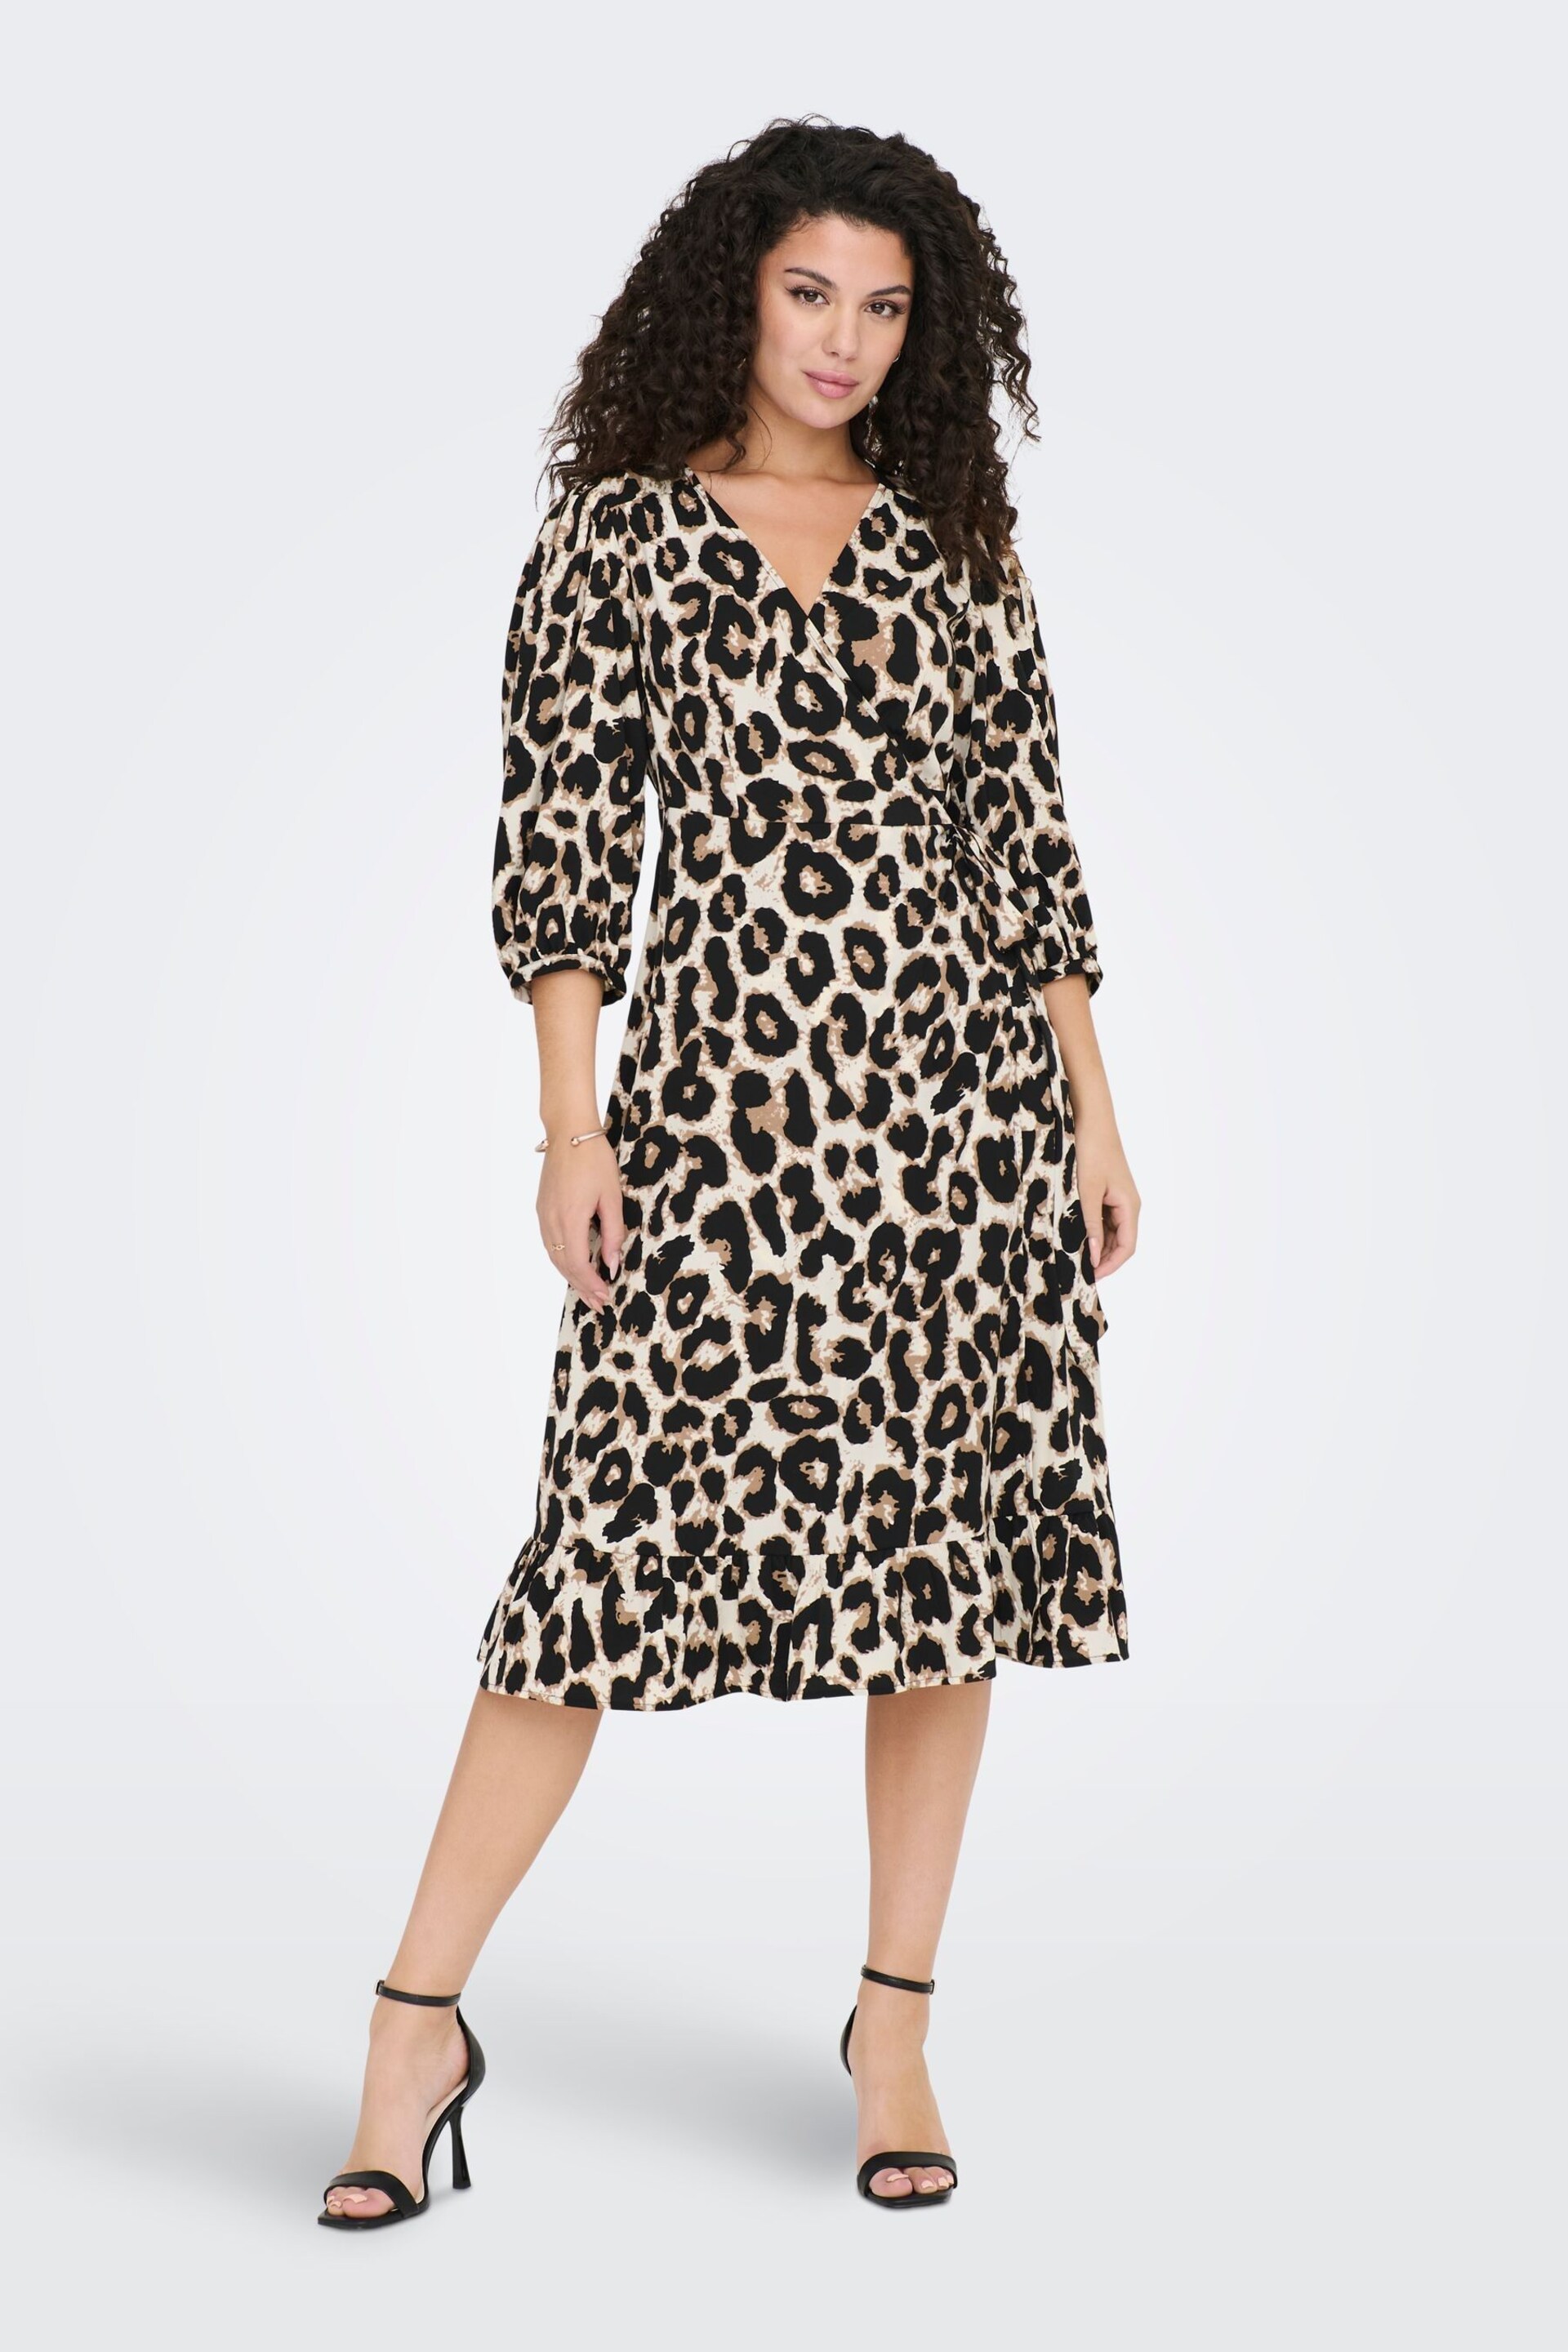 ONLY Leopard Print Long Sleeve Wrap Midi Dress - Image 1 of 5